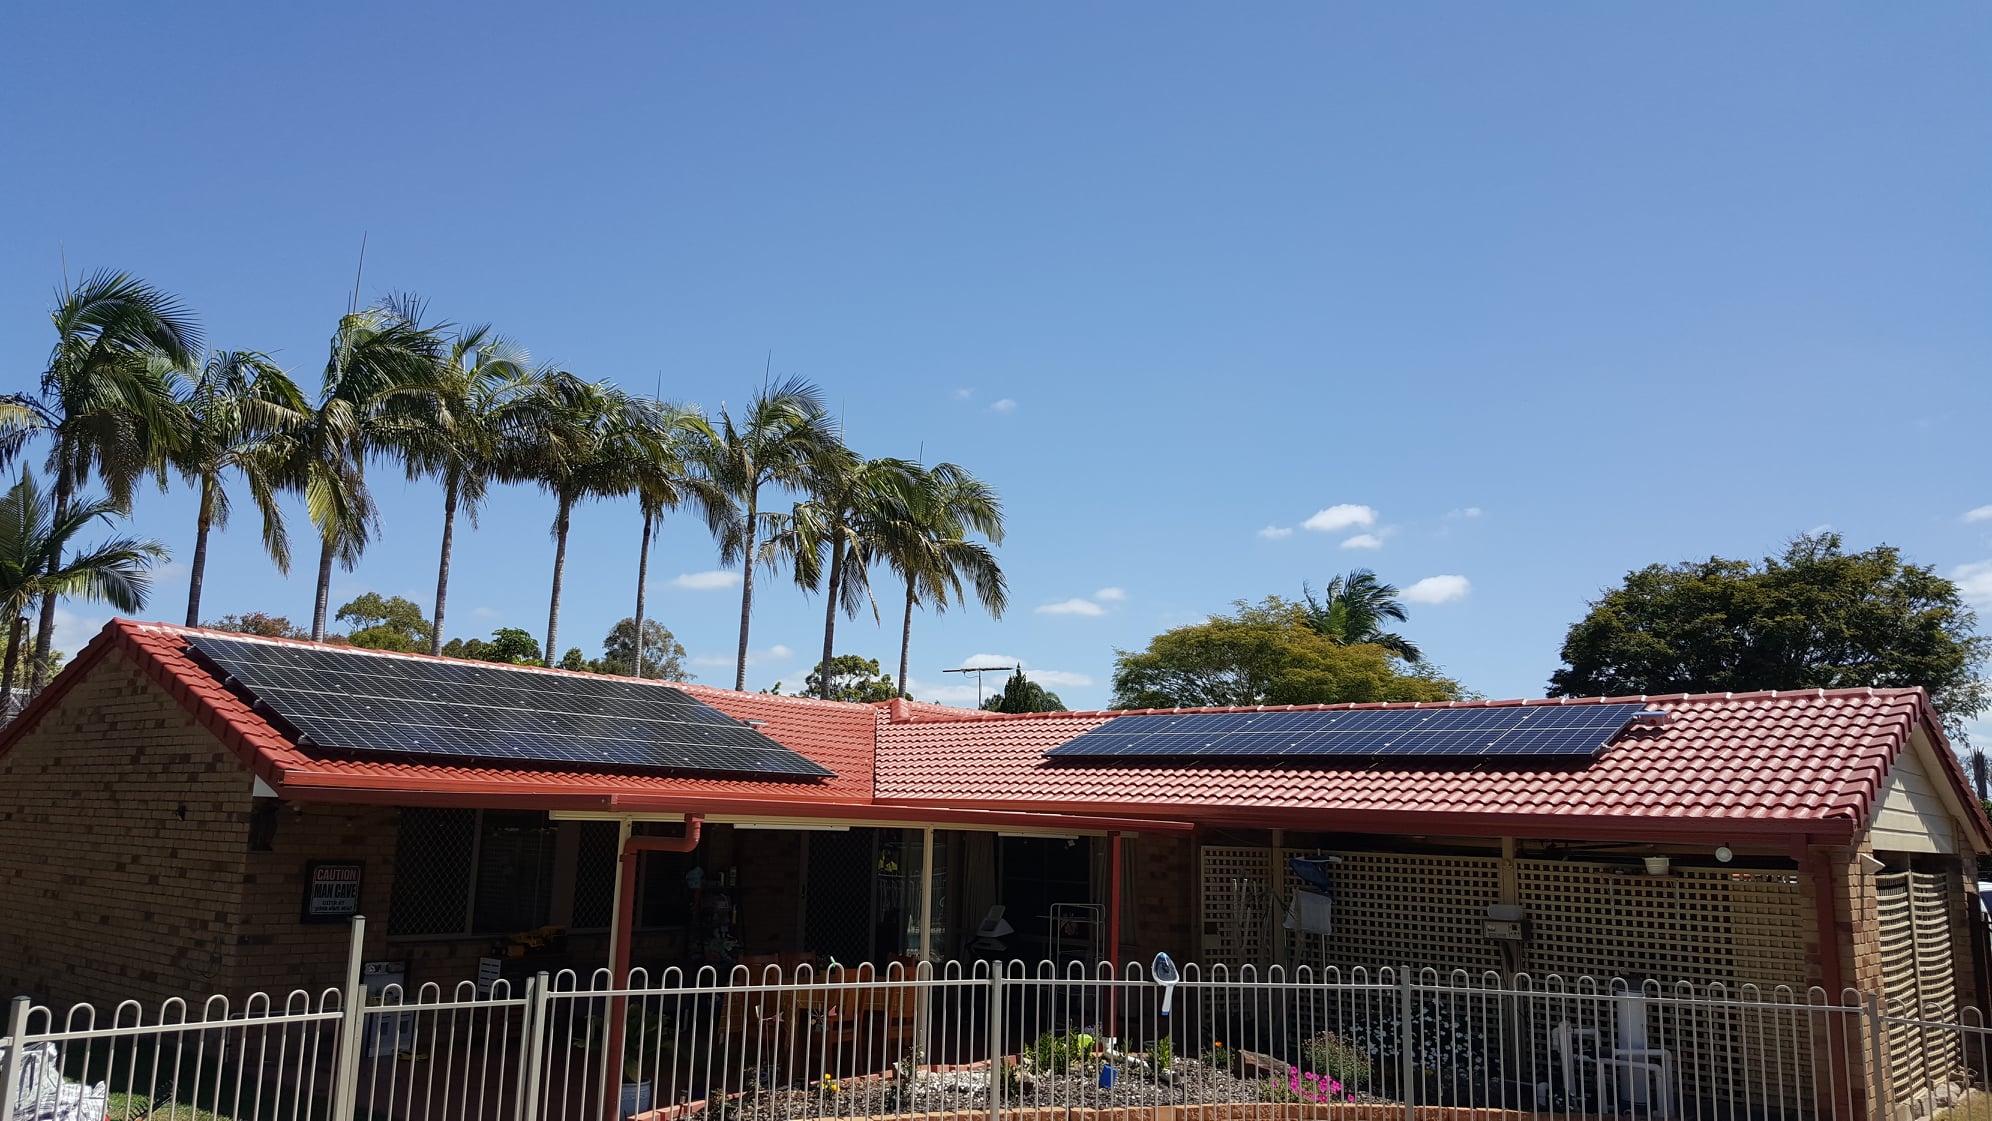 Single storey house with red roof and solar panels, palm trees in background with blue skies